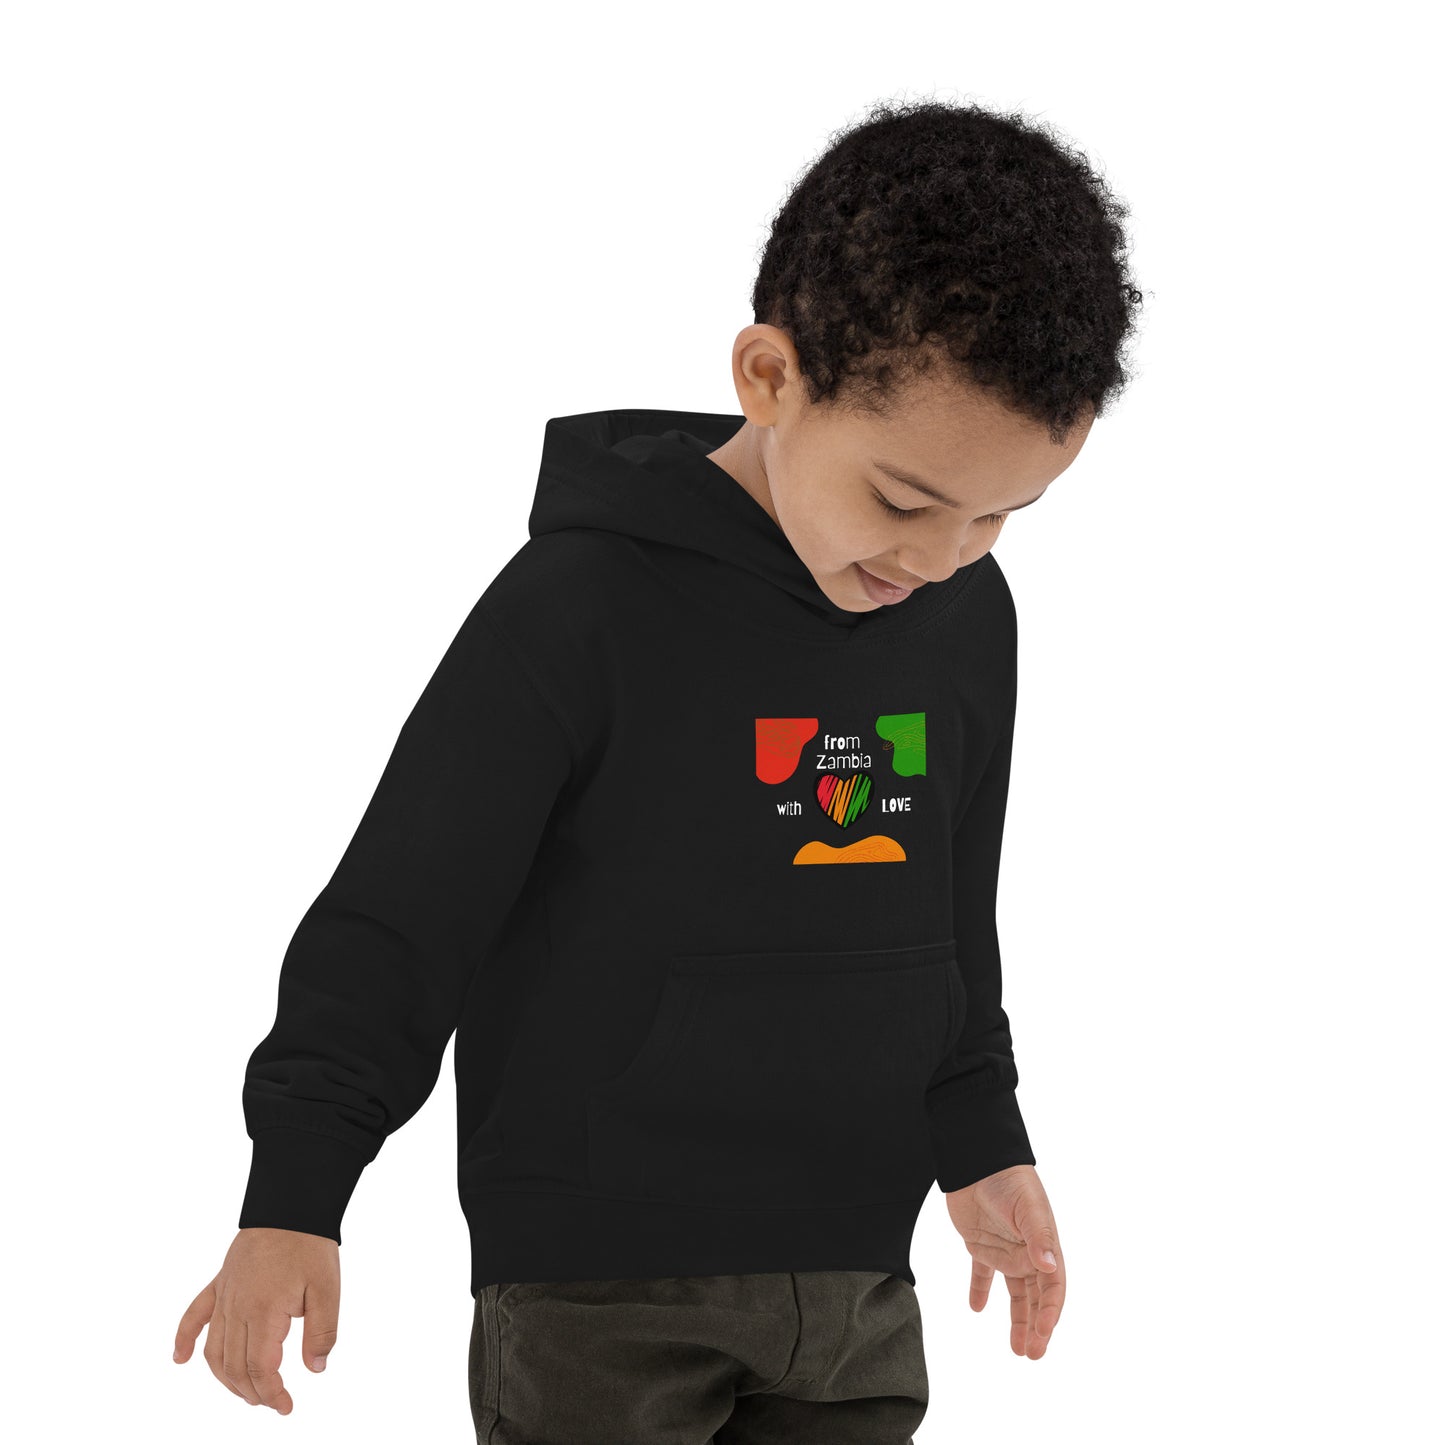 Kids From Zambia With Love Hoodie